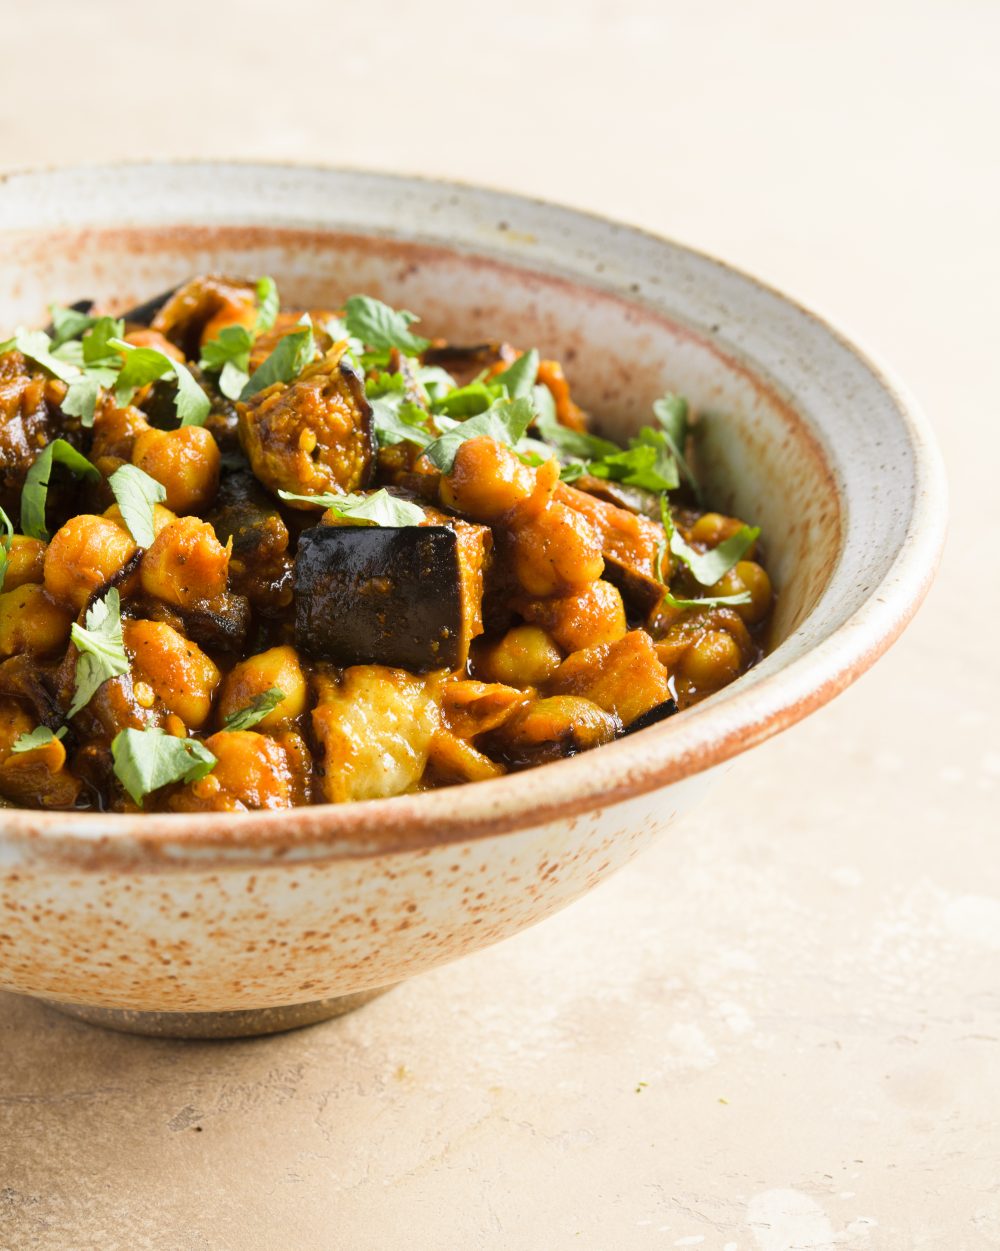 Curried eggplant chickpea stew v